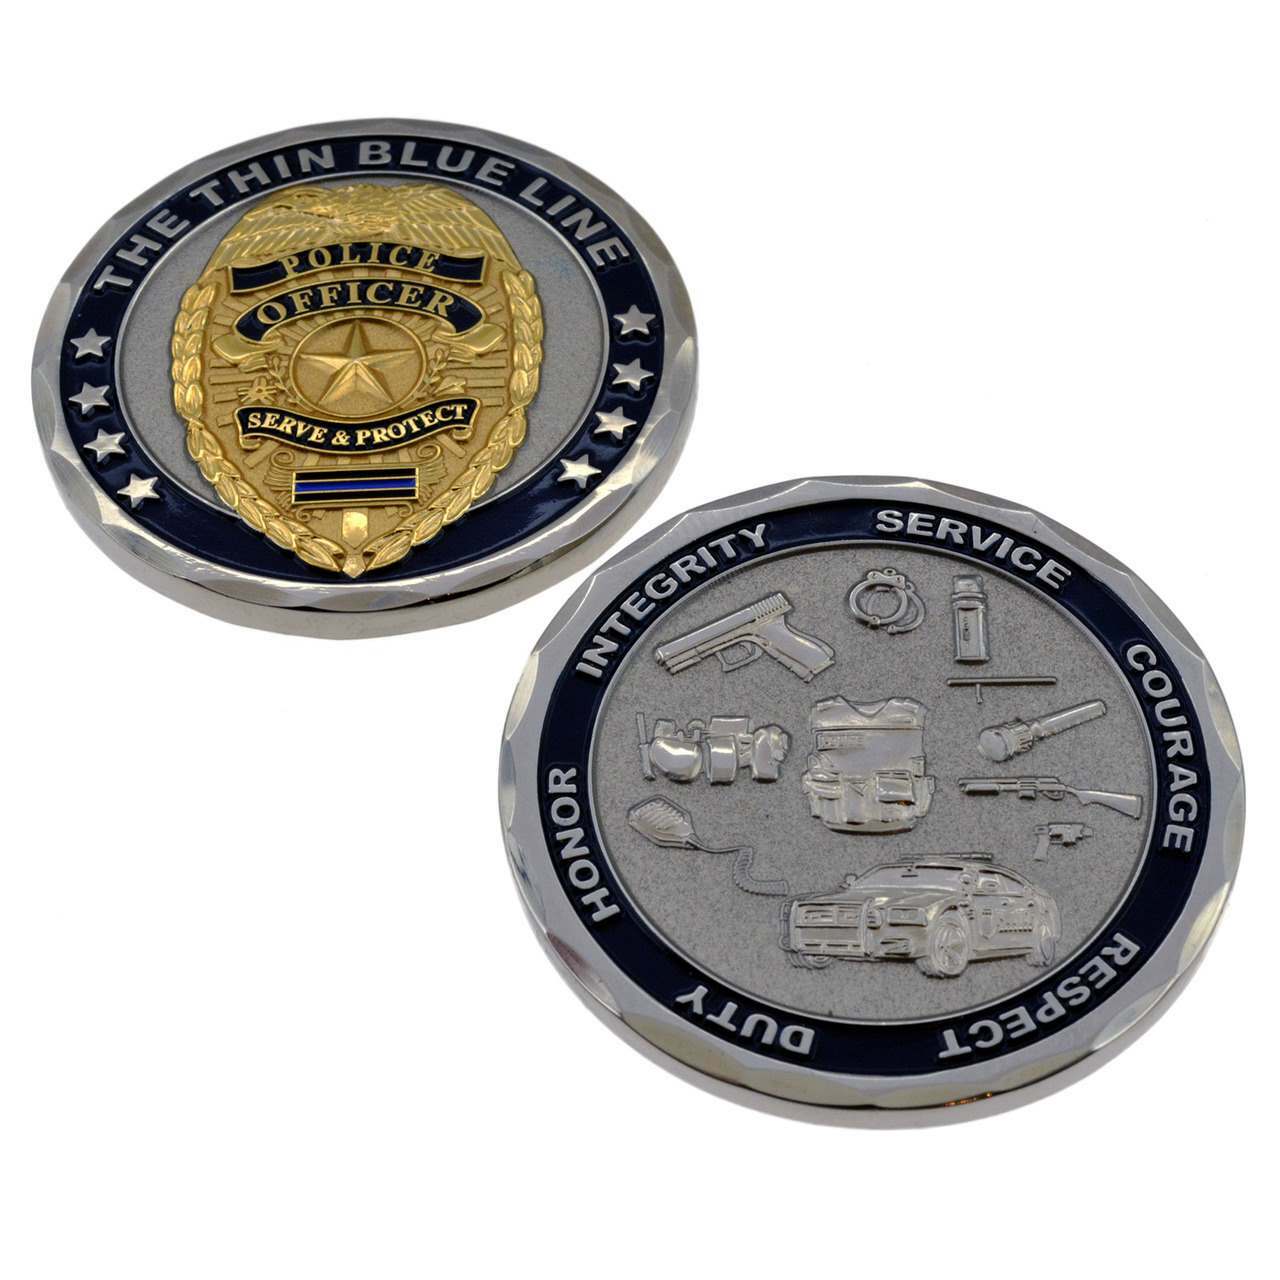 THIN BLUE LINE POLICE OFFICER CHALLENGE COIN